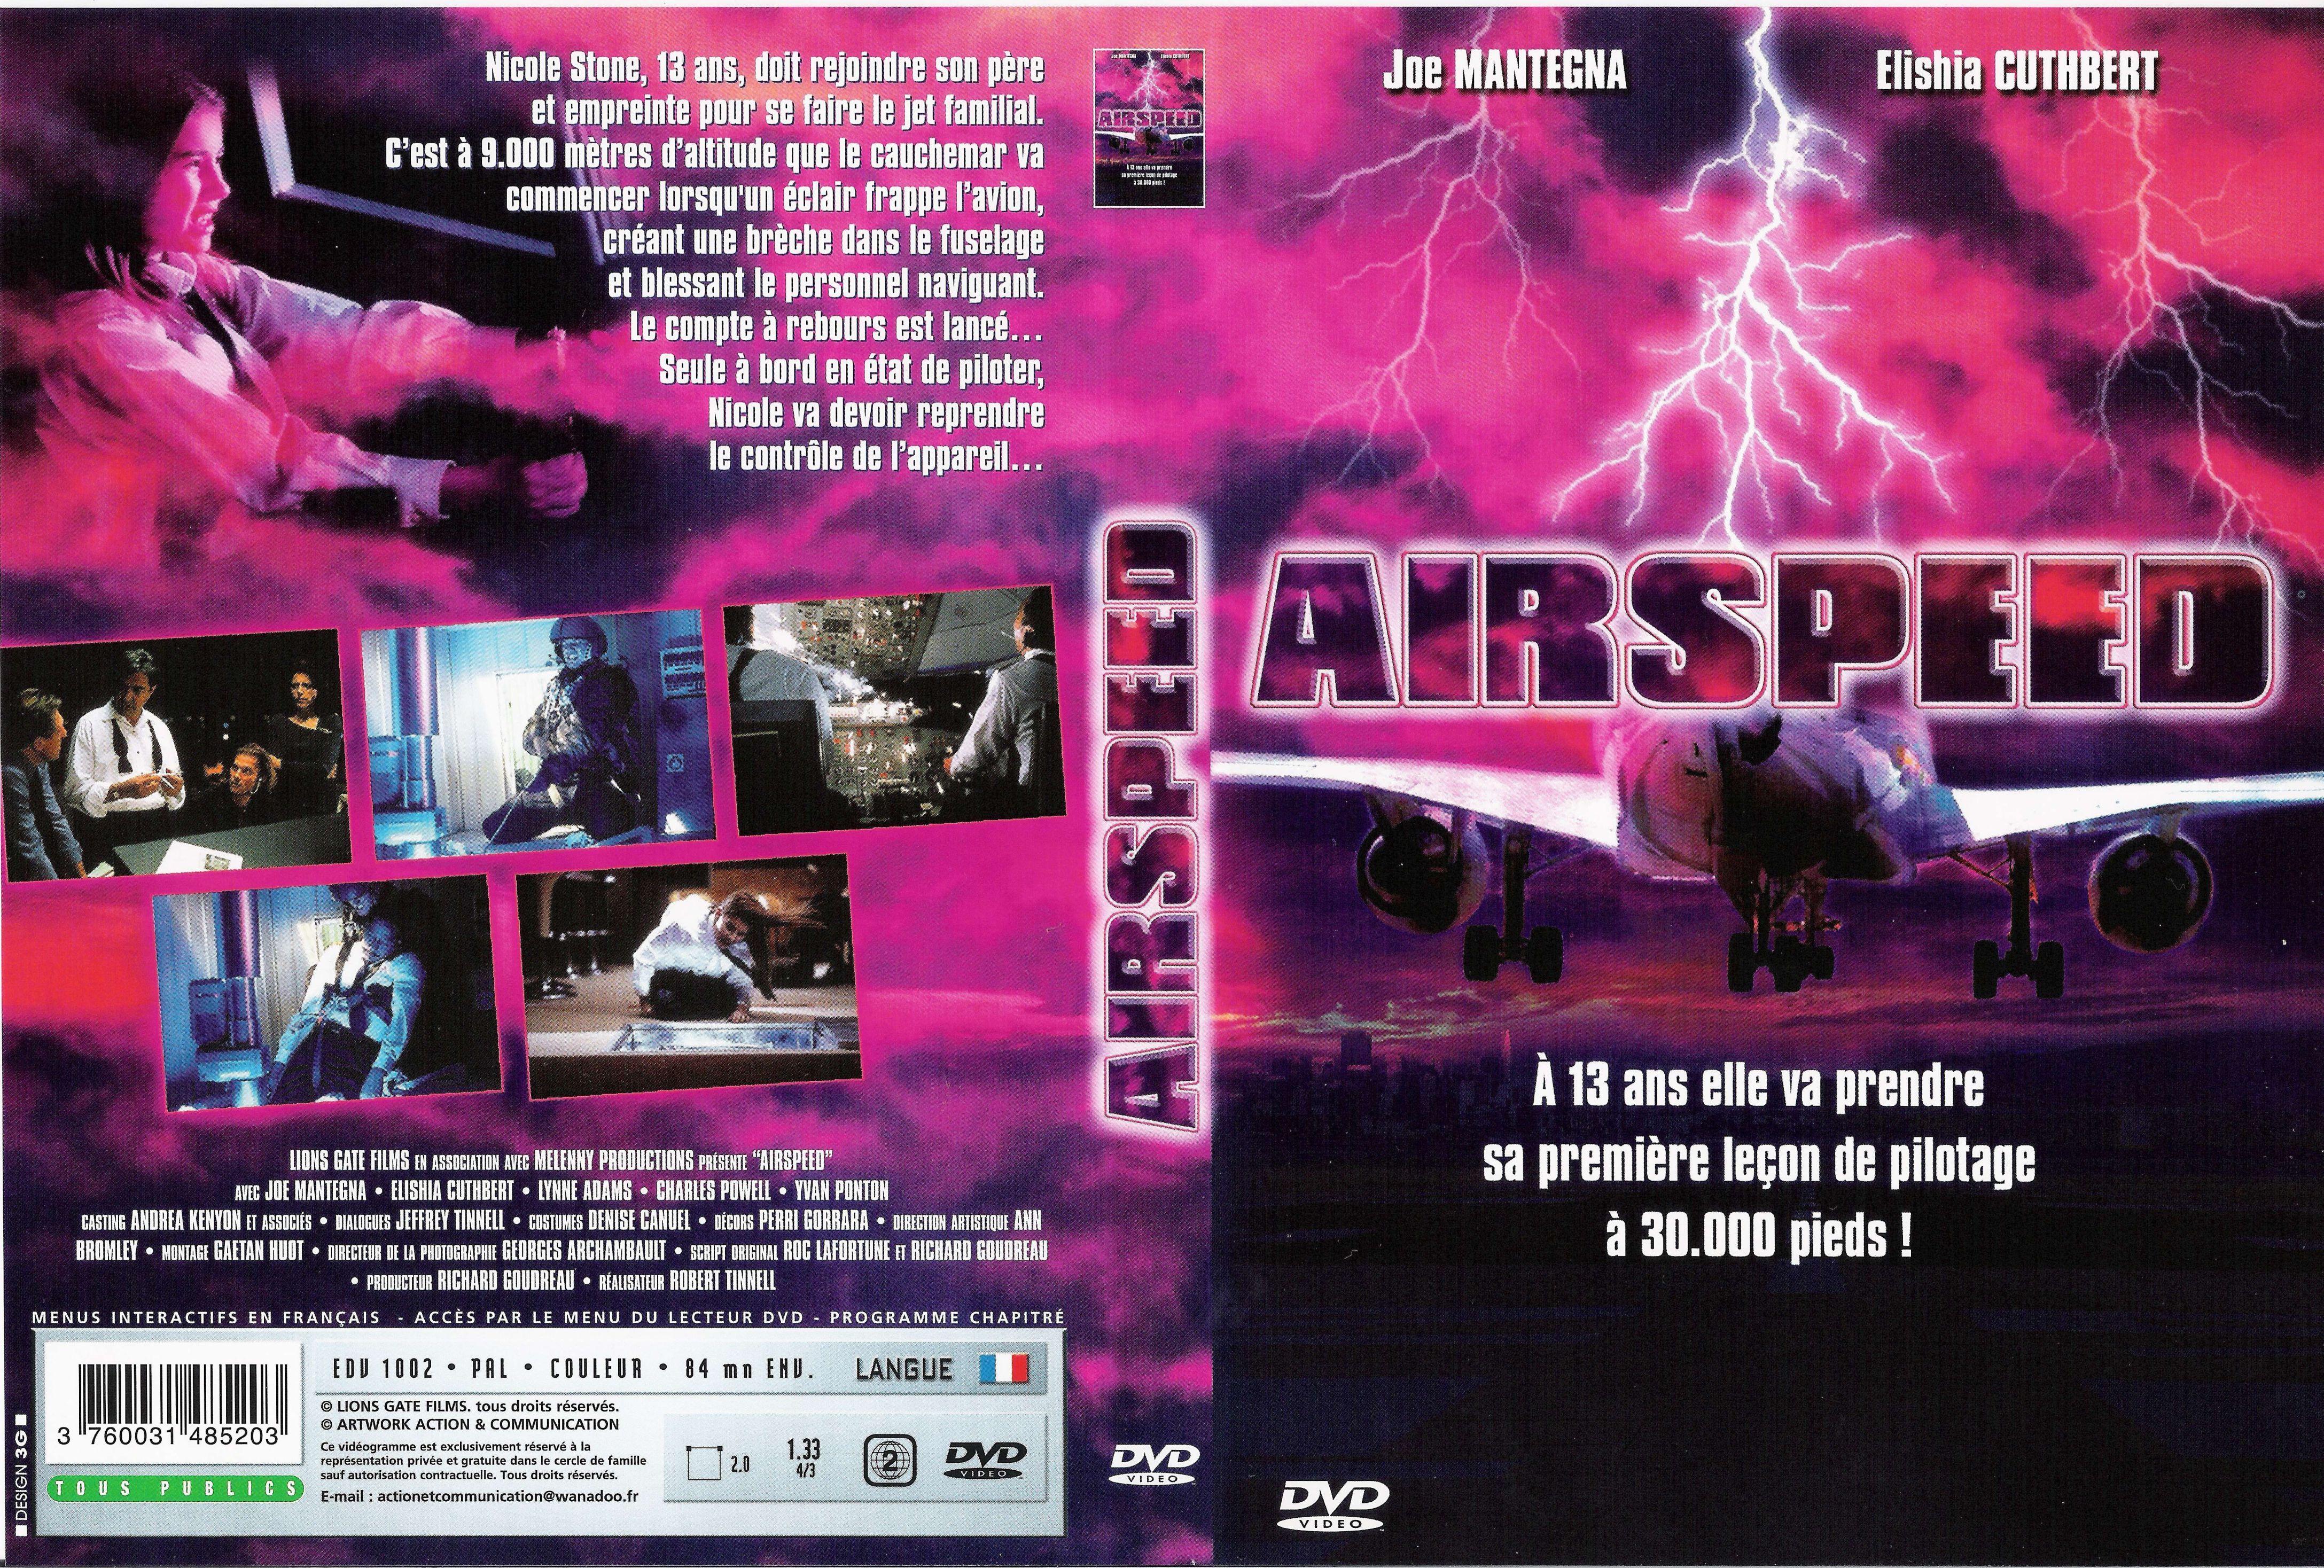 Jaquette DVD Airspeed